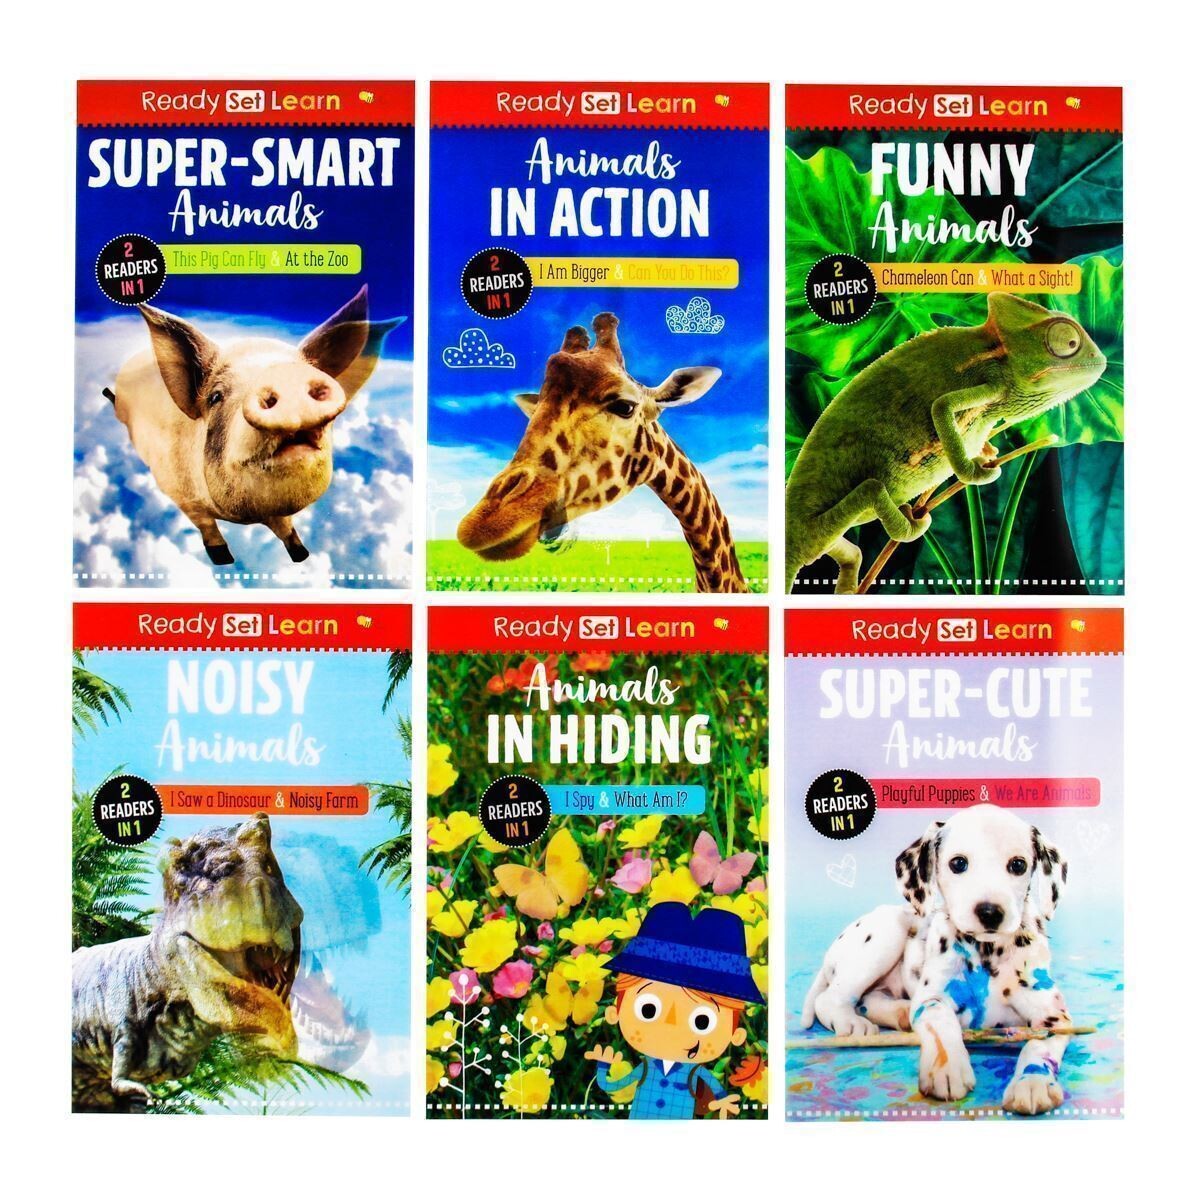 Ready Set Learn - 2 Readers in 1 (Any one), name: Funny Animals